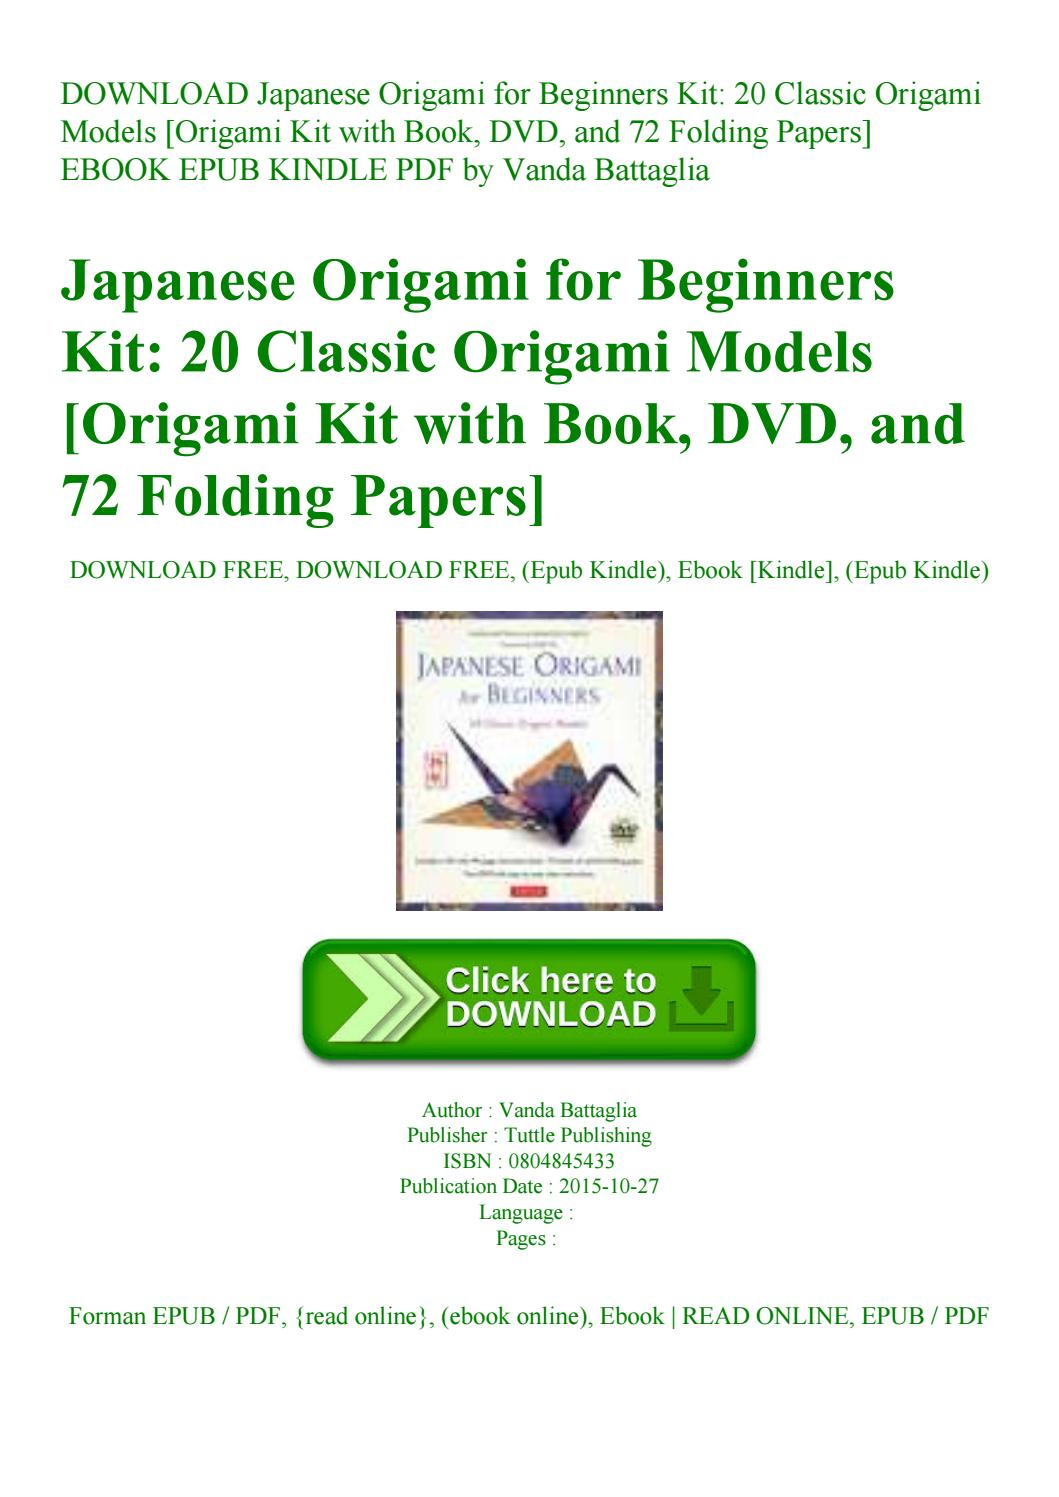 Origami For Beginners Download Japanese Origami For Beginners Kit 20 Classic Origami